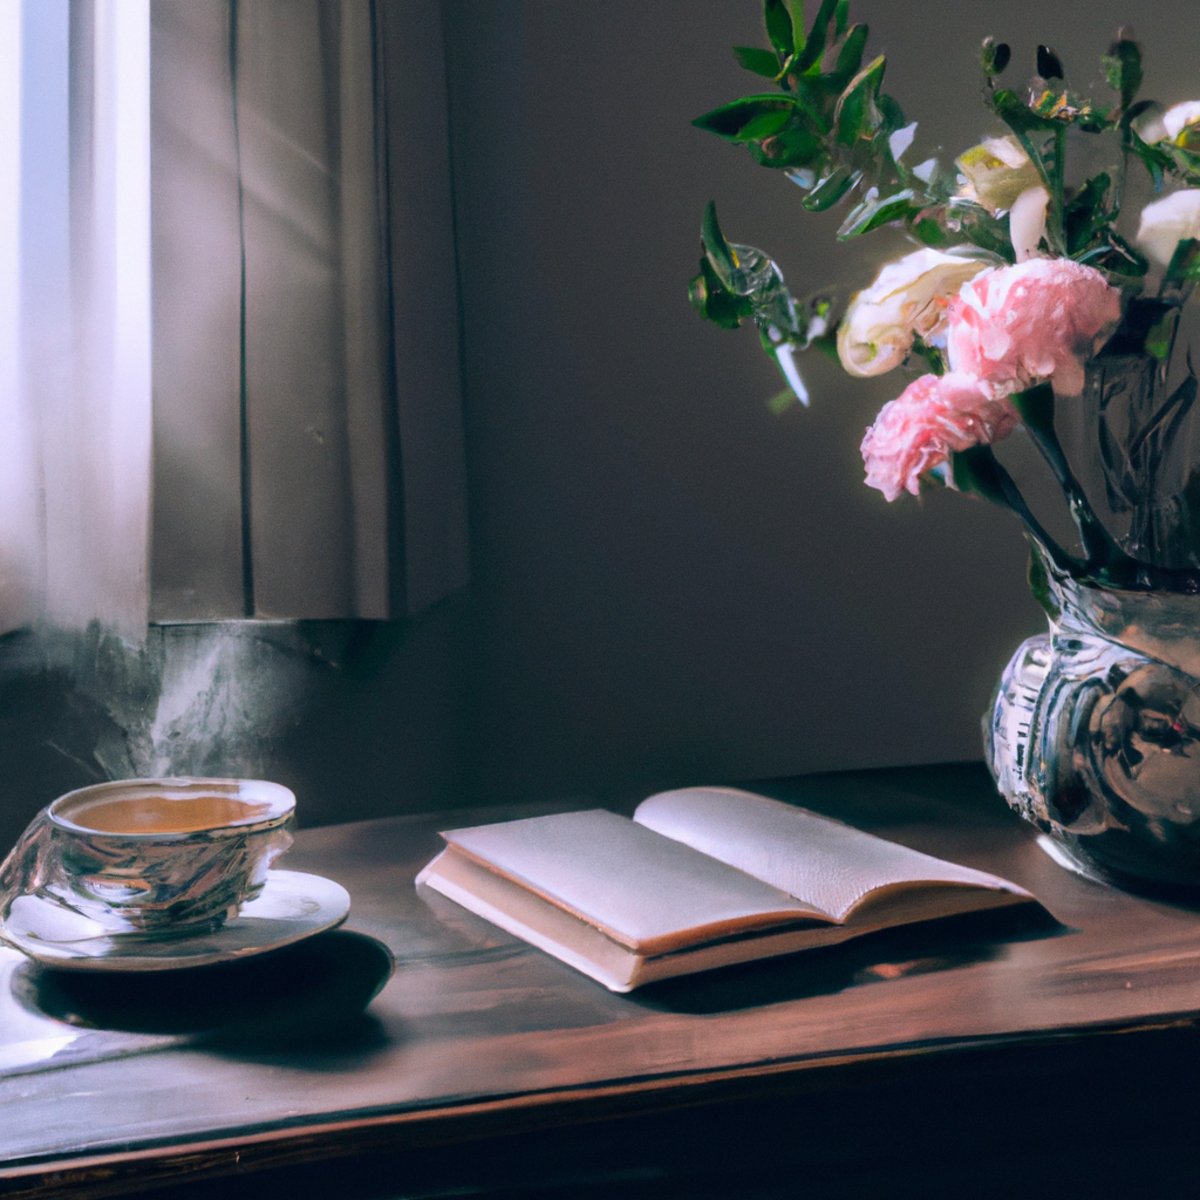 Mindfulness For Stress Reduction - A serene scene of a wooden table with tea, a book, and flowers, illuminated by warm light, exuding calmness.